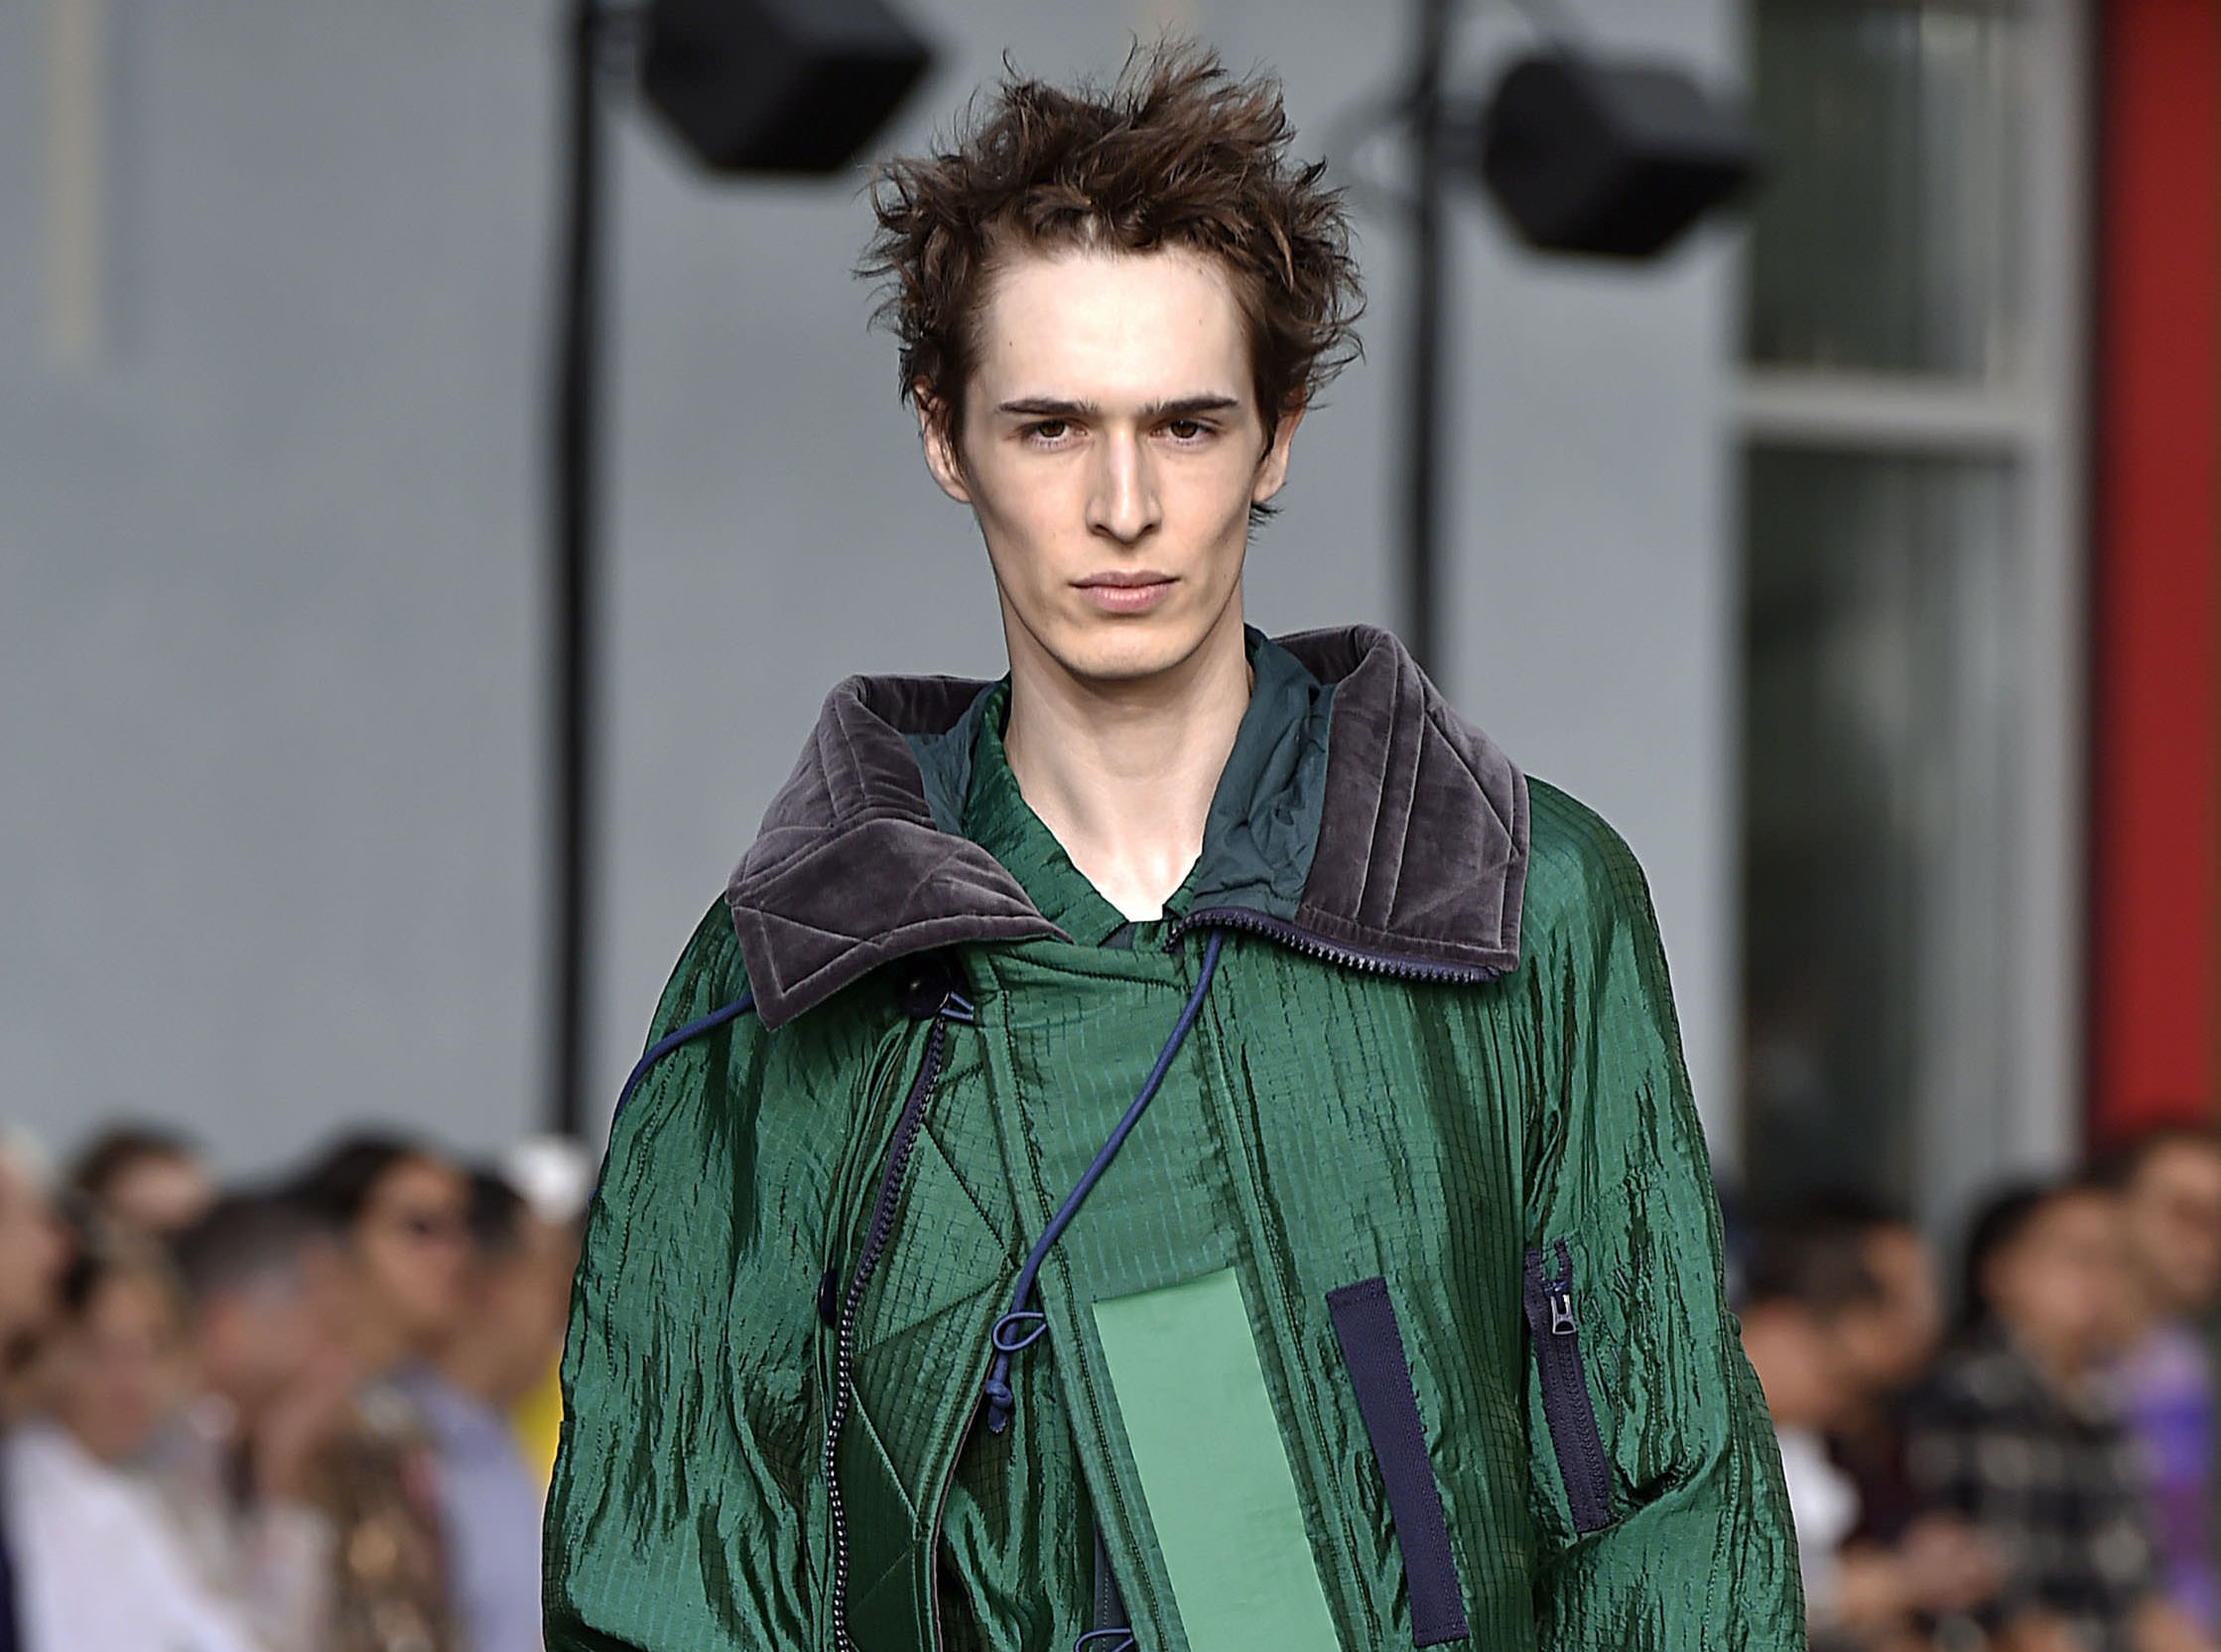 Sacai 2018 SS18 Men's and Women's Collection